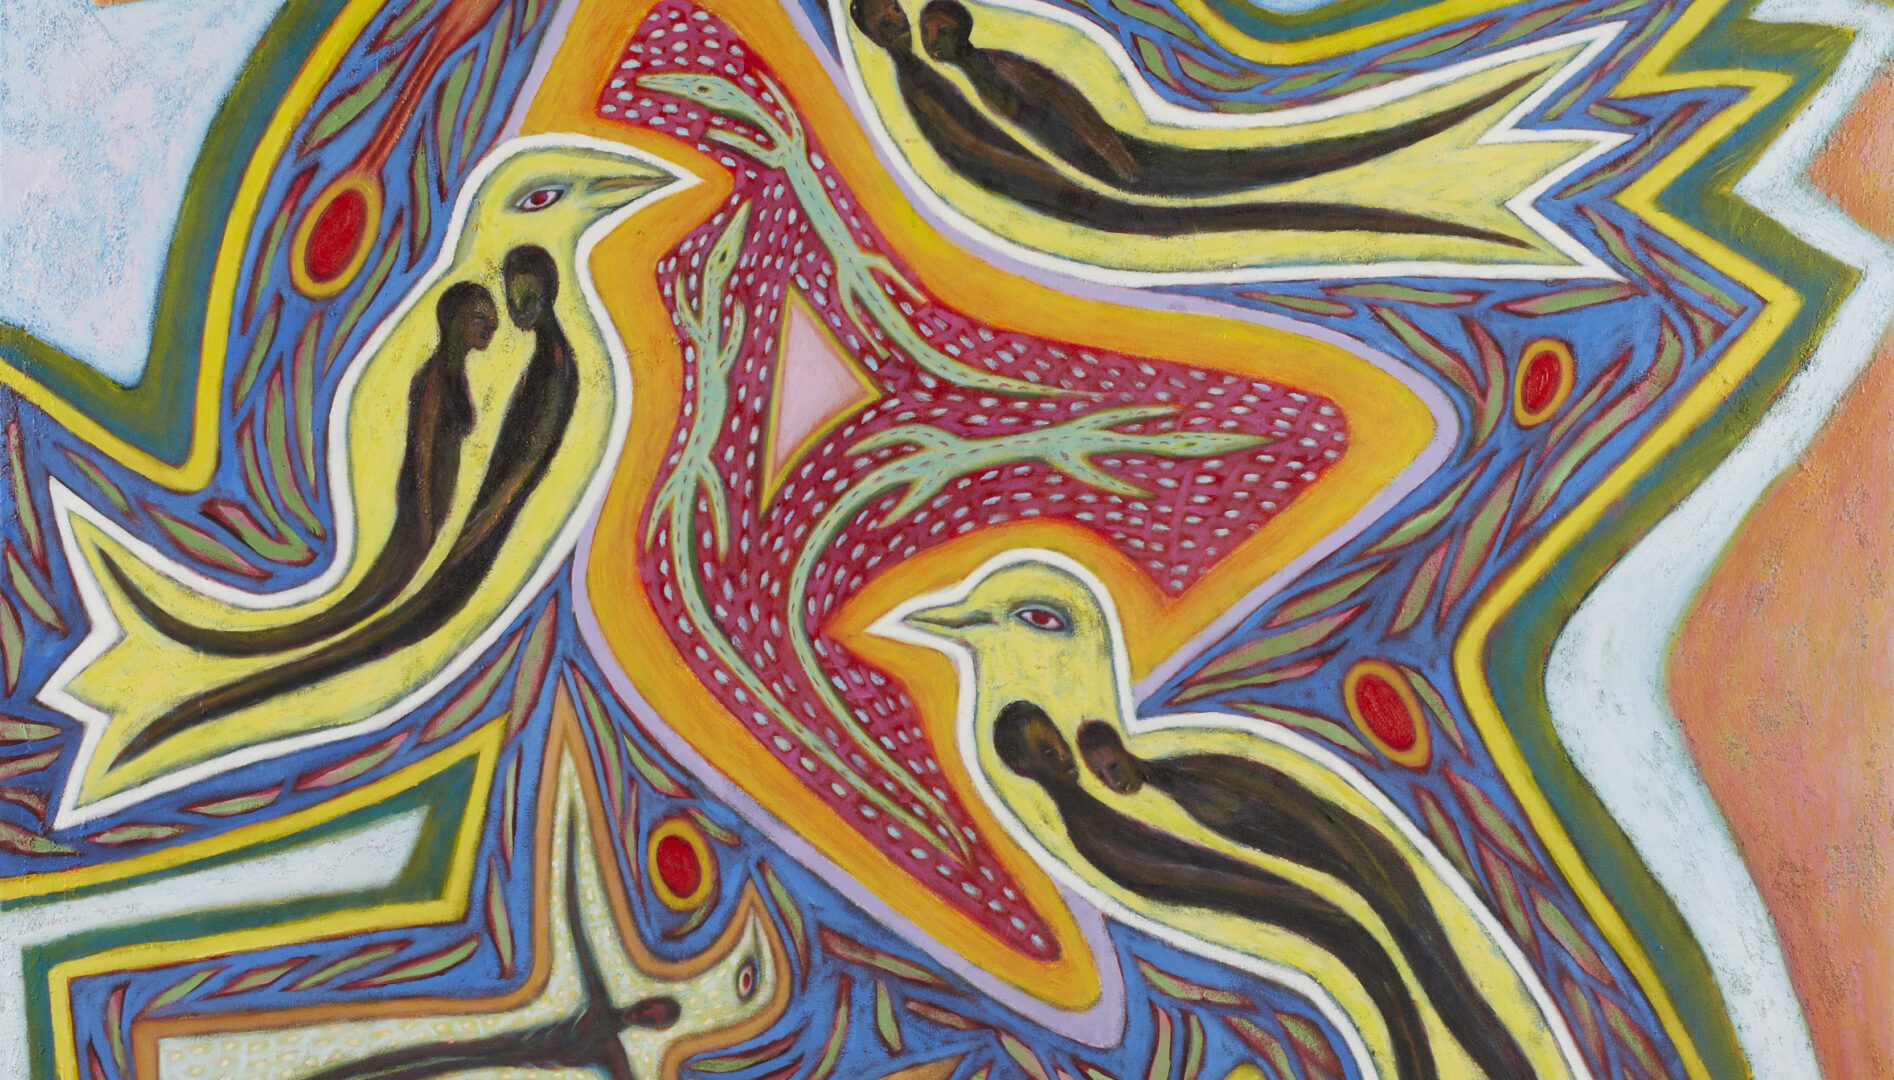 Painting of abstract shapes with outlines of birds and people in blue, red, orange, and yellow